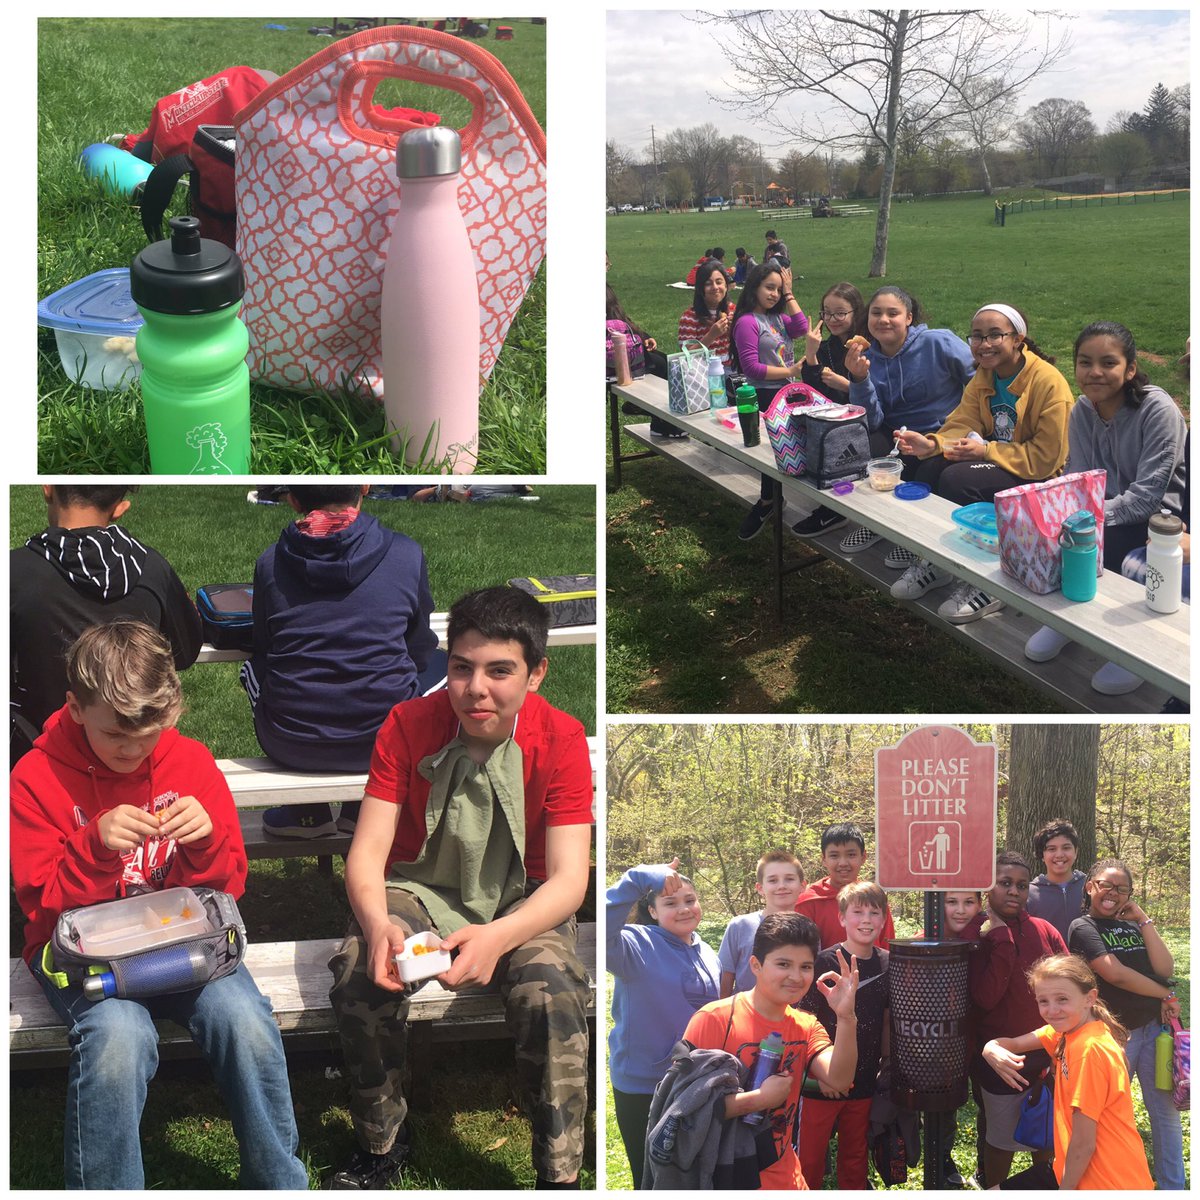 6th grade goes trash free! Ss did an amazing job packing as little residual garbage as possible! Reusable bottles, containers and cloth napkins were used to help save our planet! @EarthDayNetwork @GBoulegeris @Ville_Sup #EarthDay #trashfree #keepSomervilleclean #allin4theVille